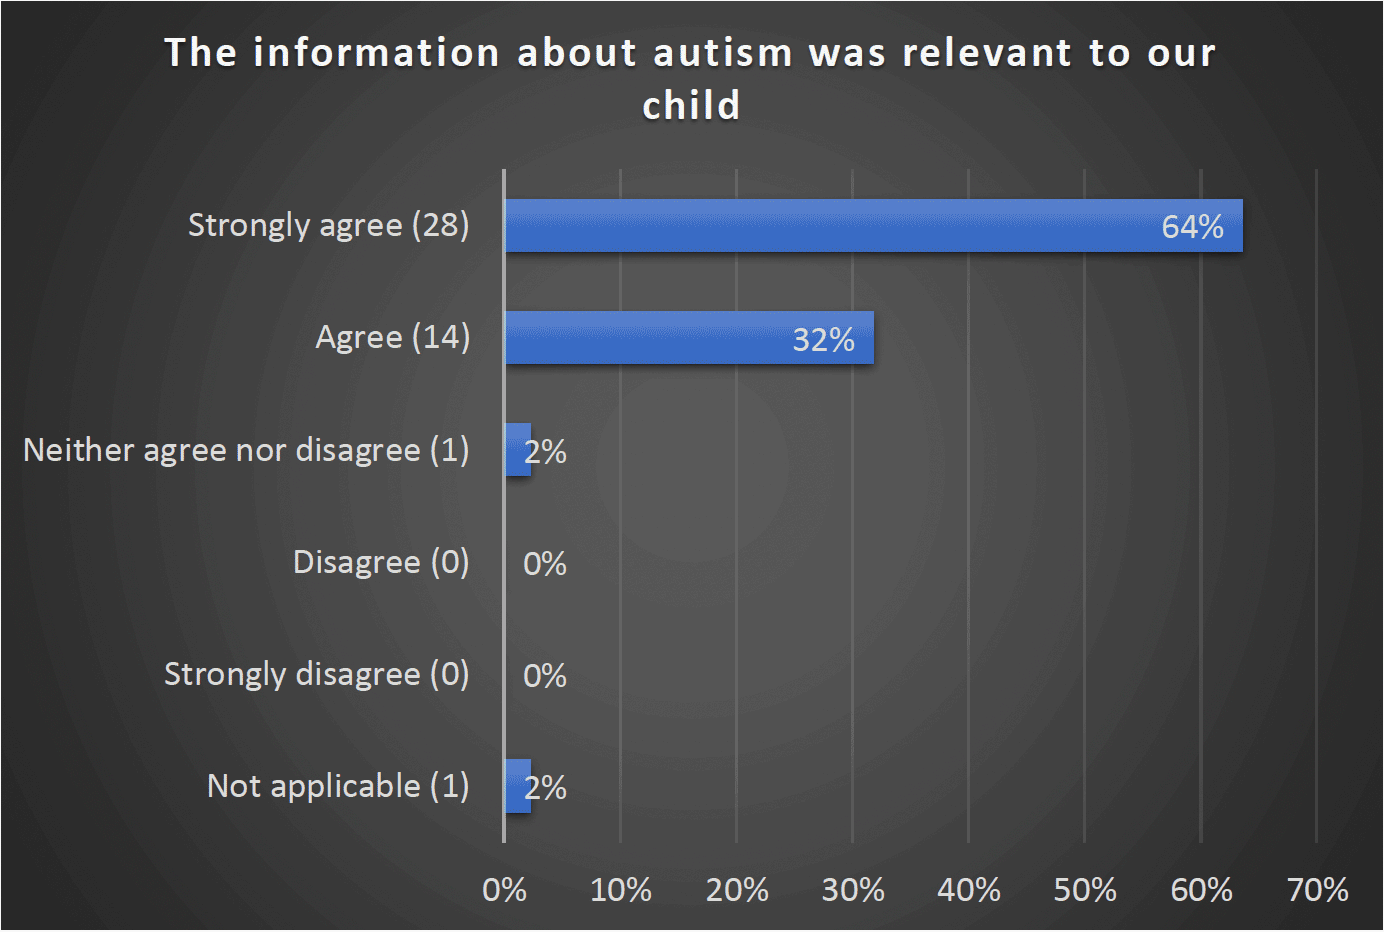 The information about autism was relevant to our child - Strongly agree (28) 64%, Agree (14) 32%, Neither agree nor disagree (1) 2%, Disagree 0, Strongly disagree 0, Not applicable (1) 2%